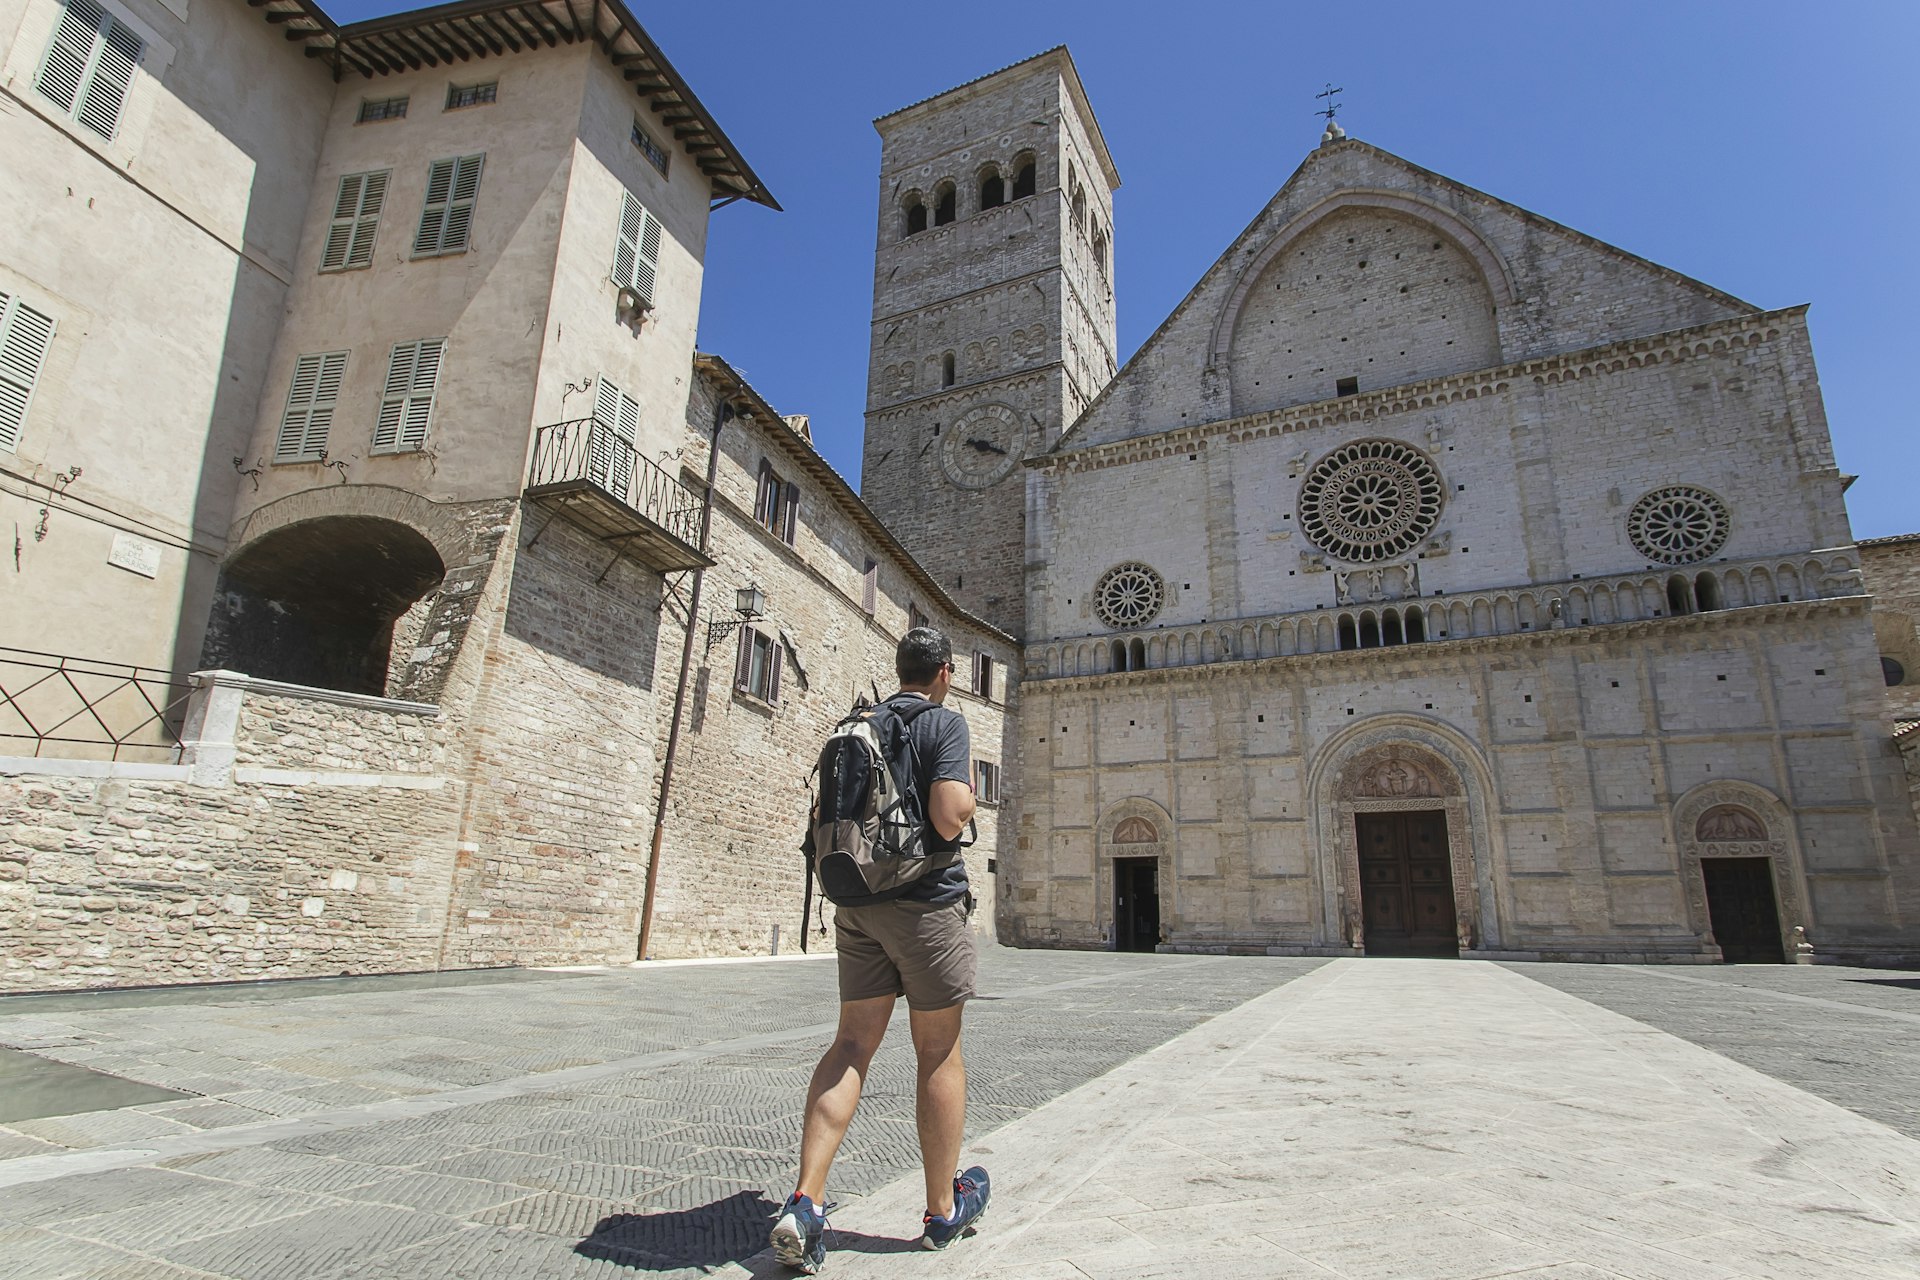 A tourist walks across an empty courtyard in front of the San Rufino Cathedral in Assisi, Italy